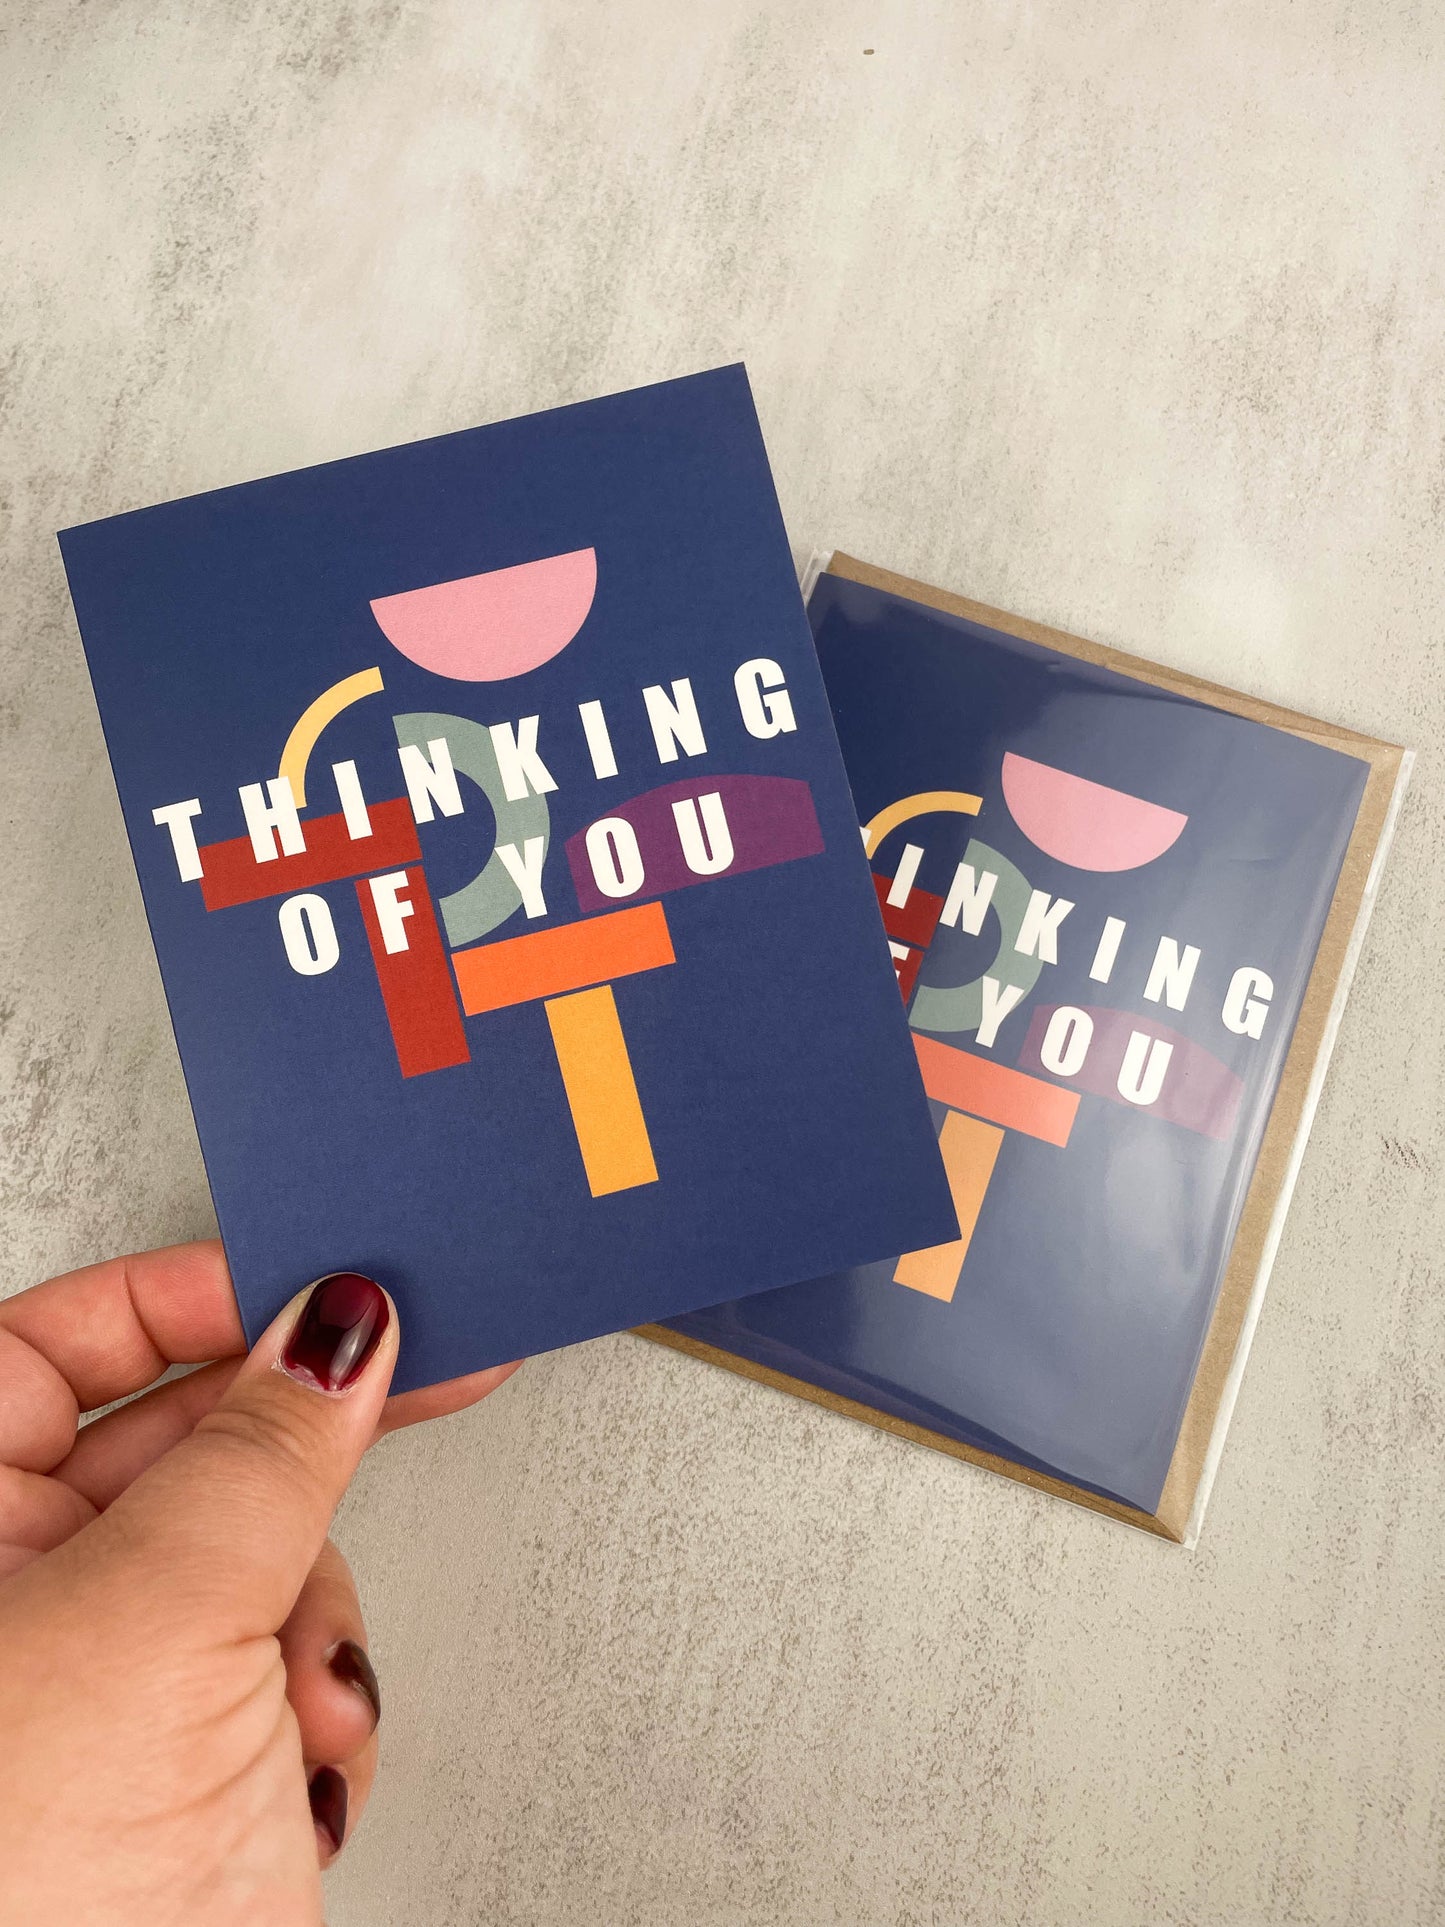 Abstract Thinking of You Greeting Card